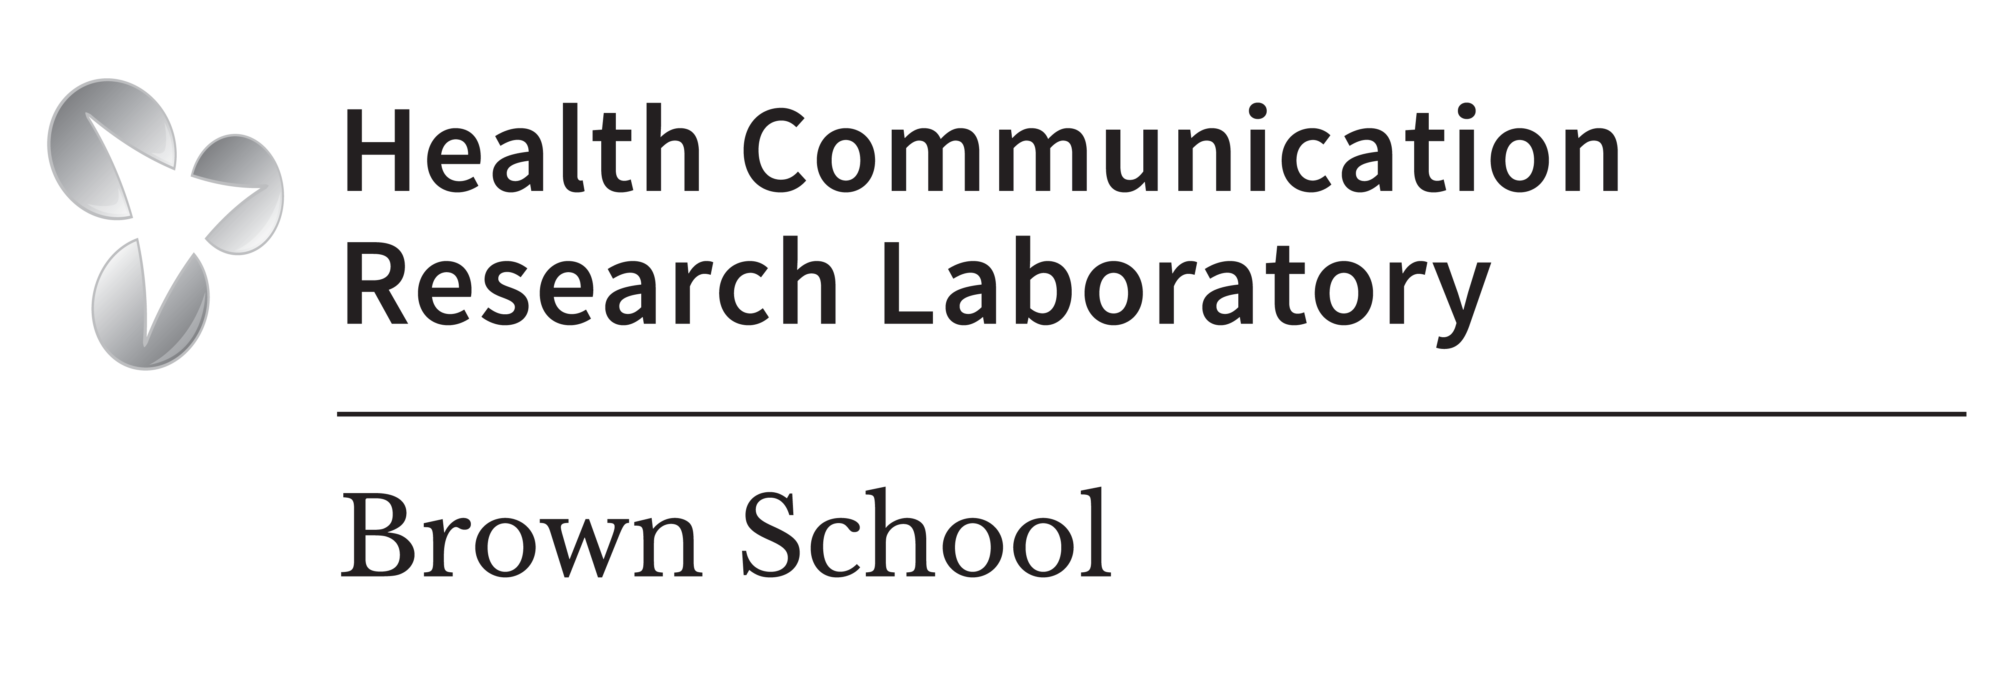 Health Communication Research Laboratory at the Brown School of Social Work